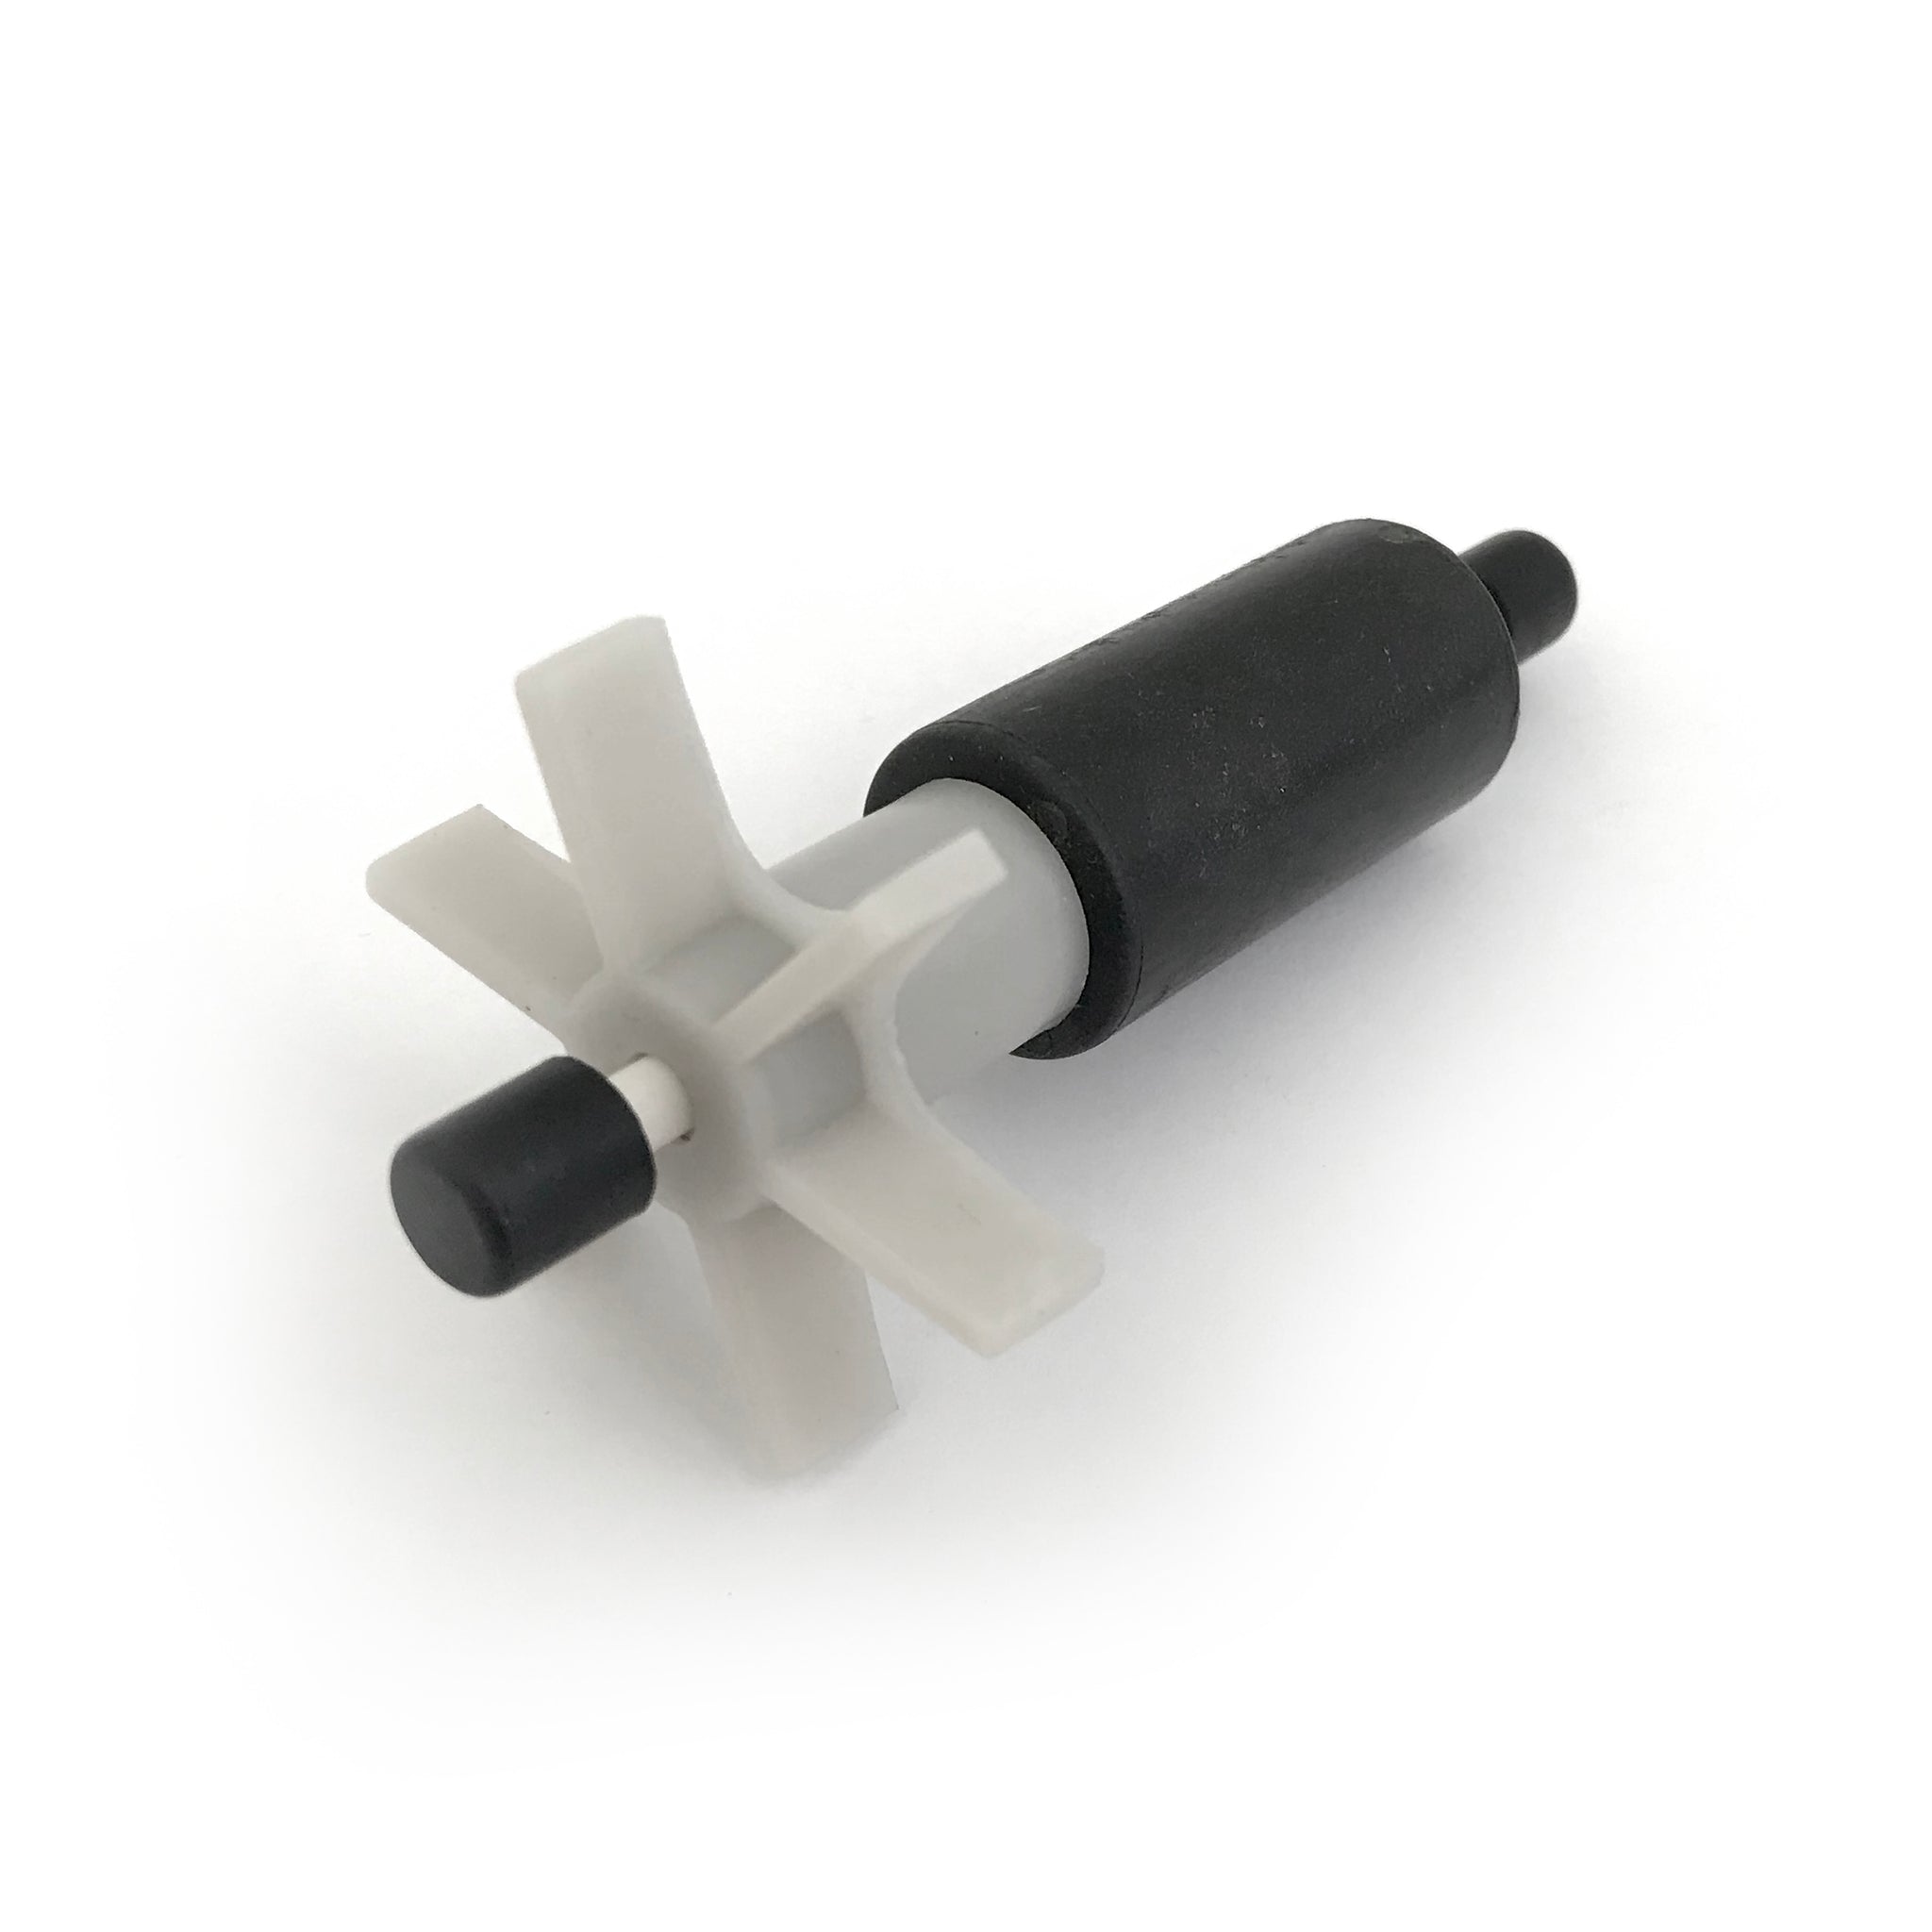 REPLACEMENT IMPELLER FOR SP-725 PUMP